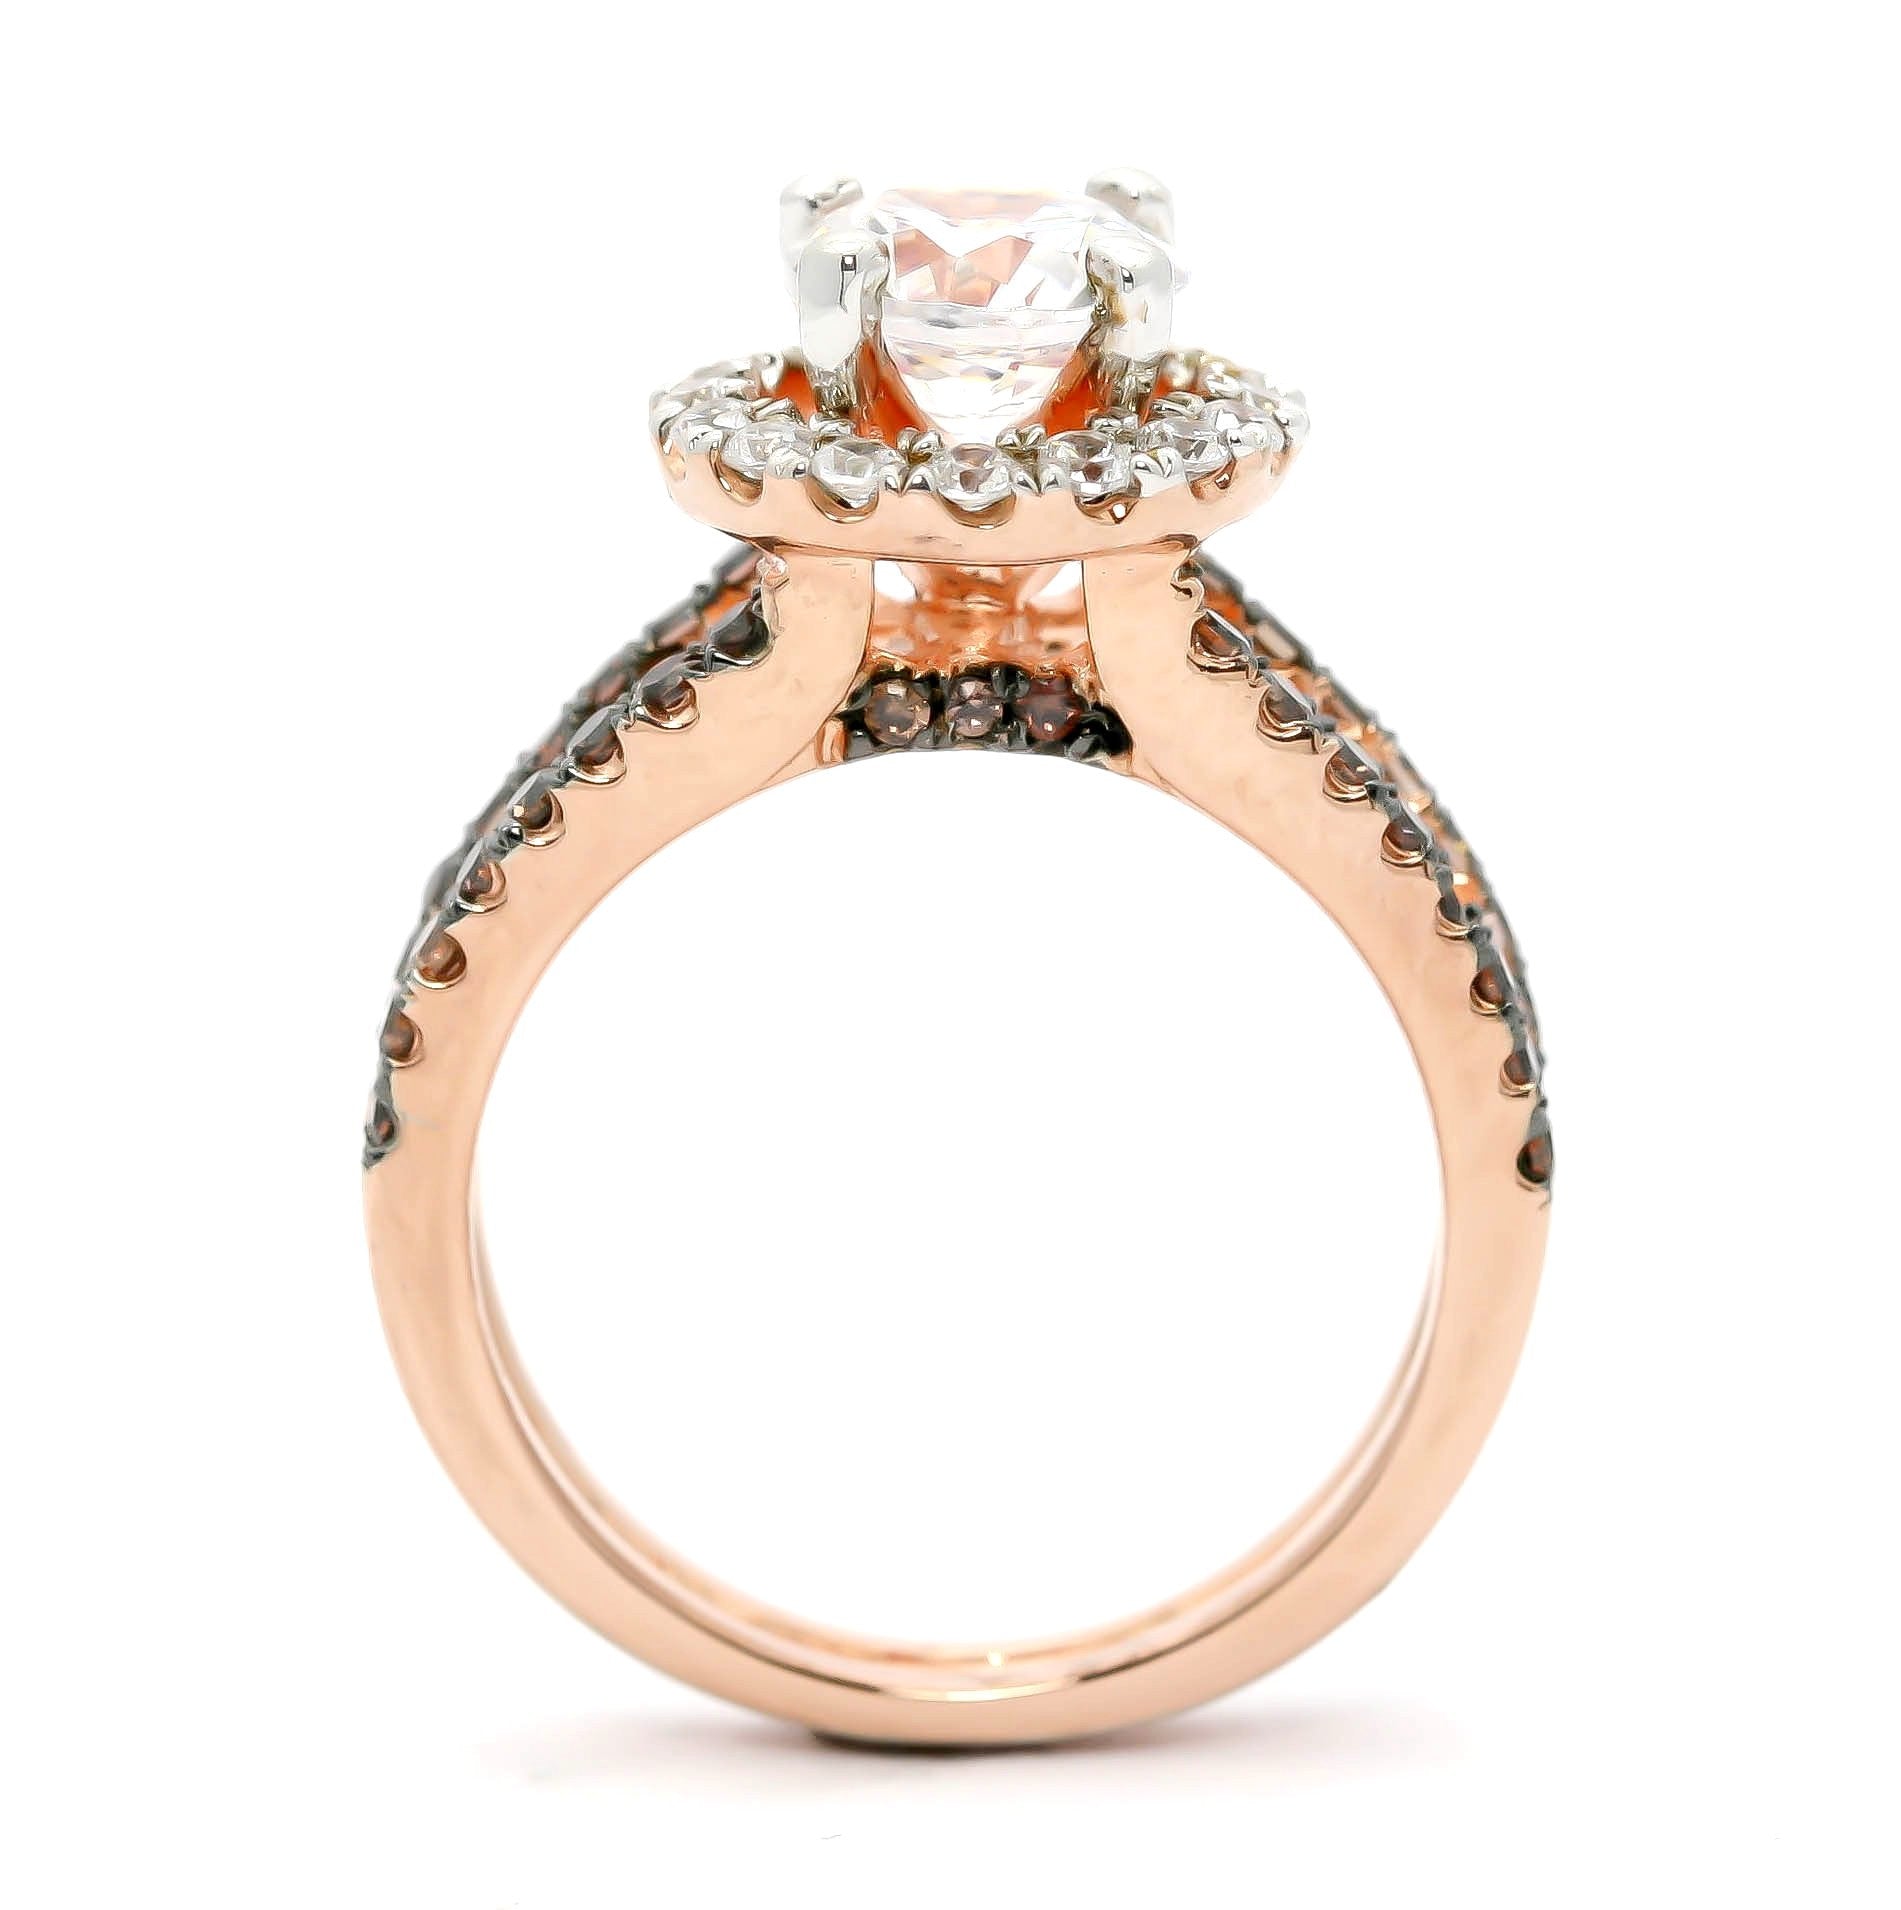 1 Carat Morganite Engagement Ring With 1.02 Carats Of White And Brown Diamonds, Anniversary Ring - MG94654